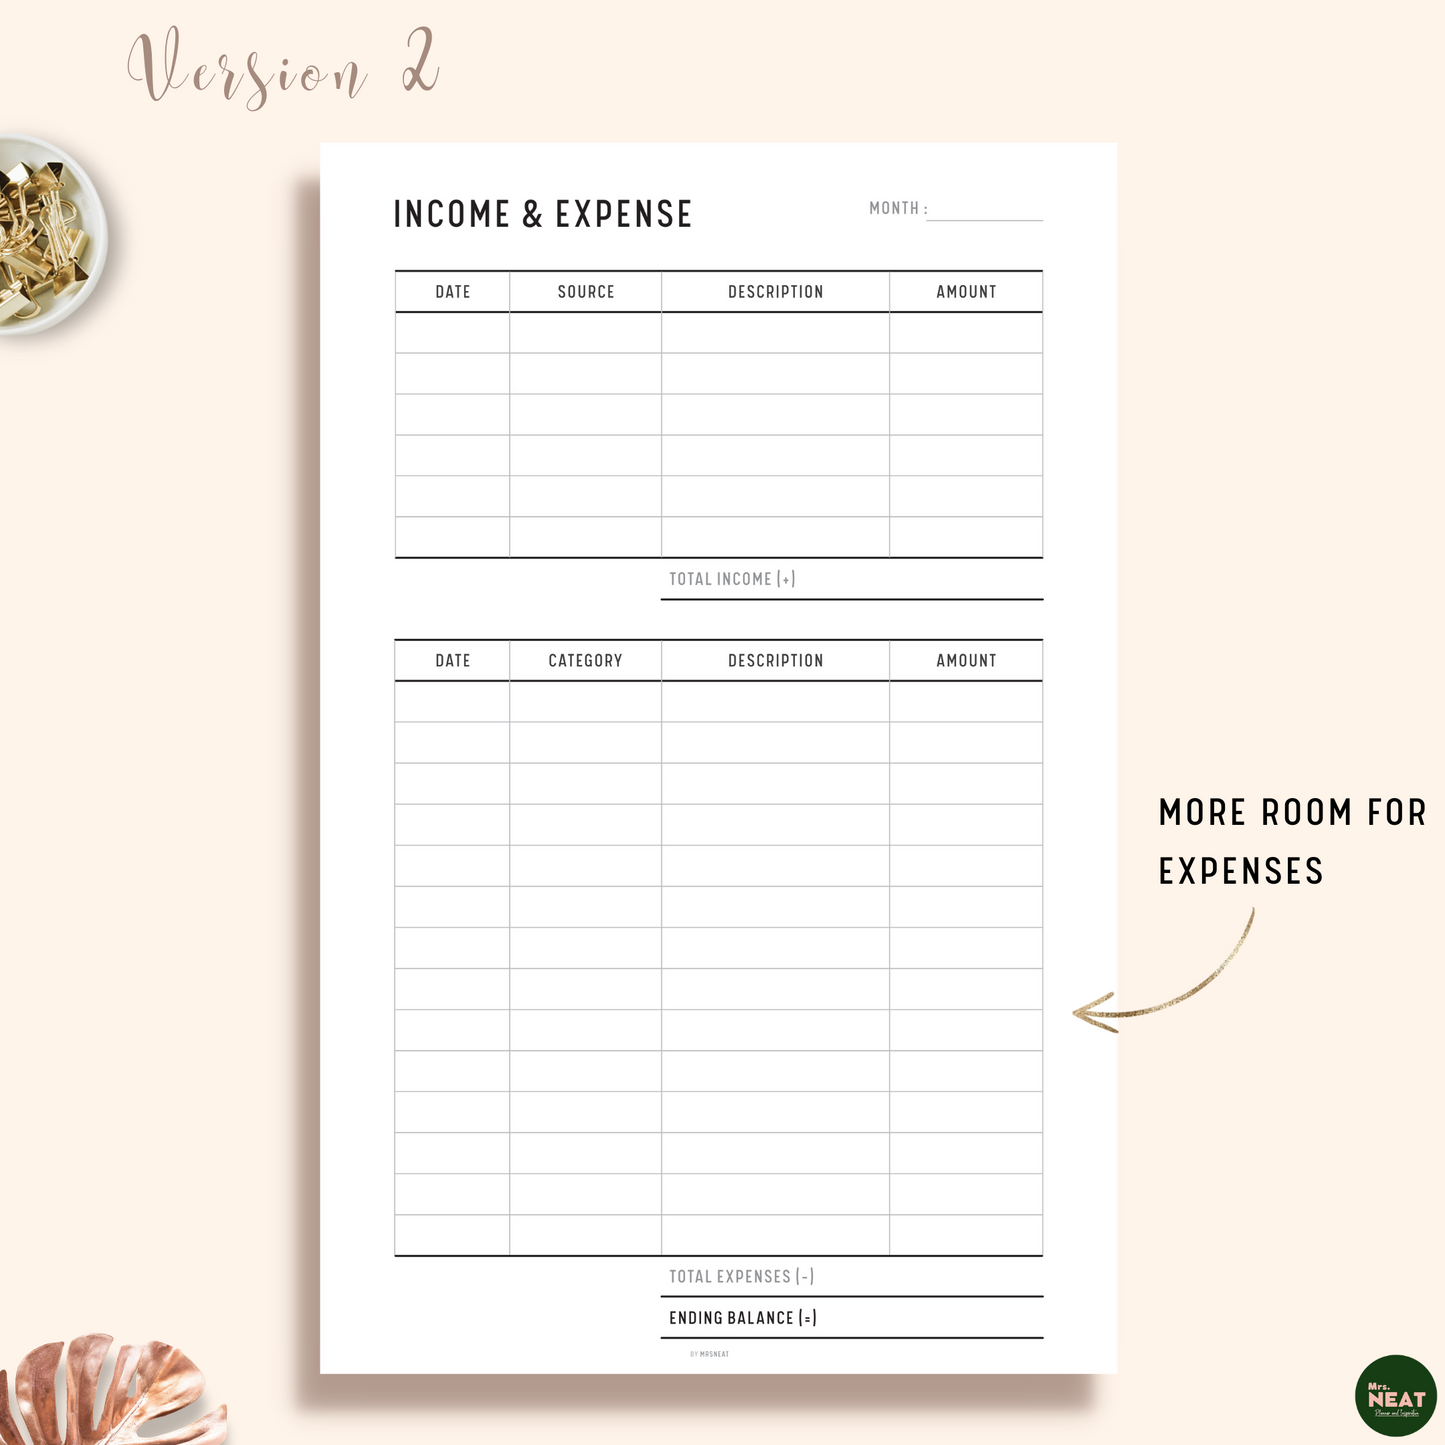 Income and Expense Tracker Planner in one page with room for income, expense and ending balance